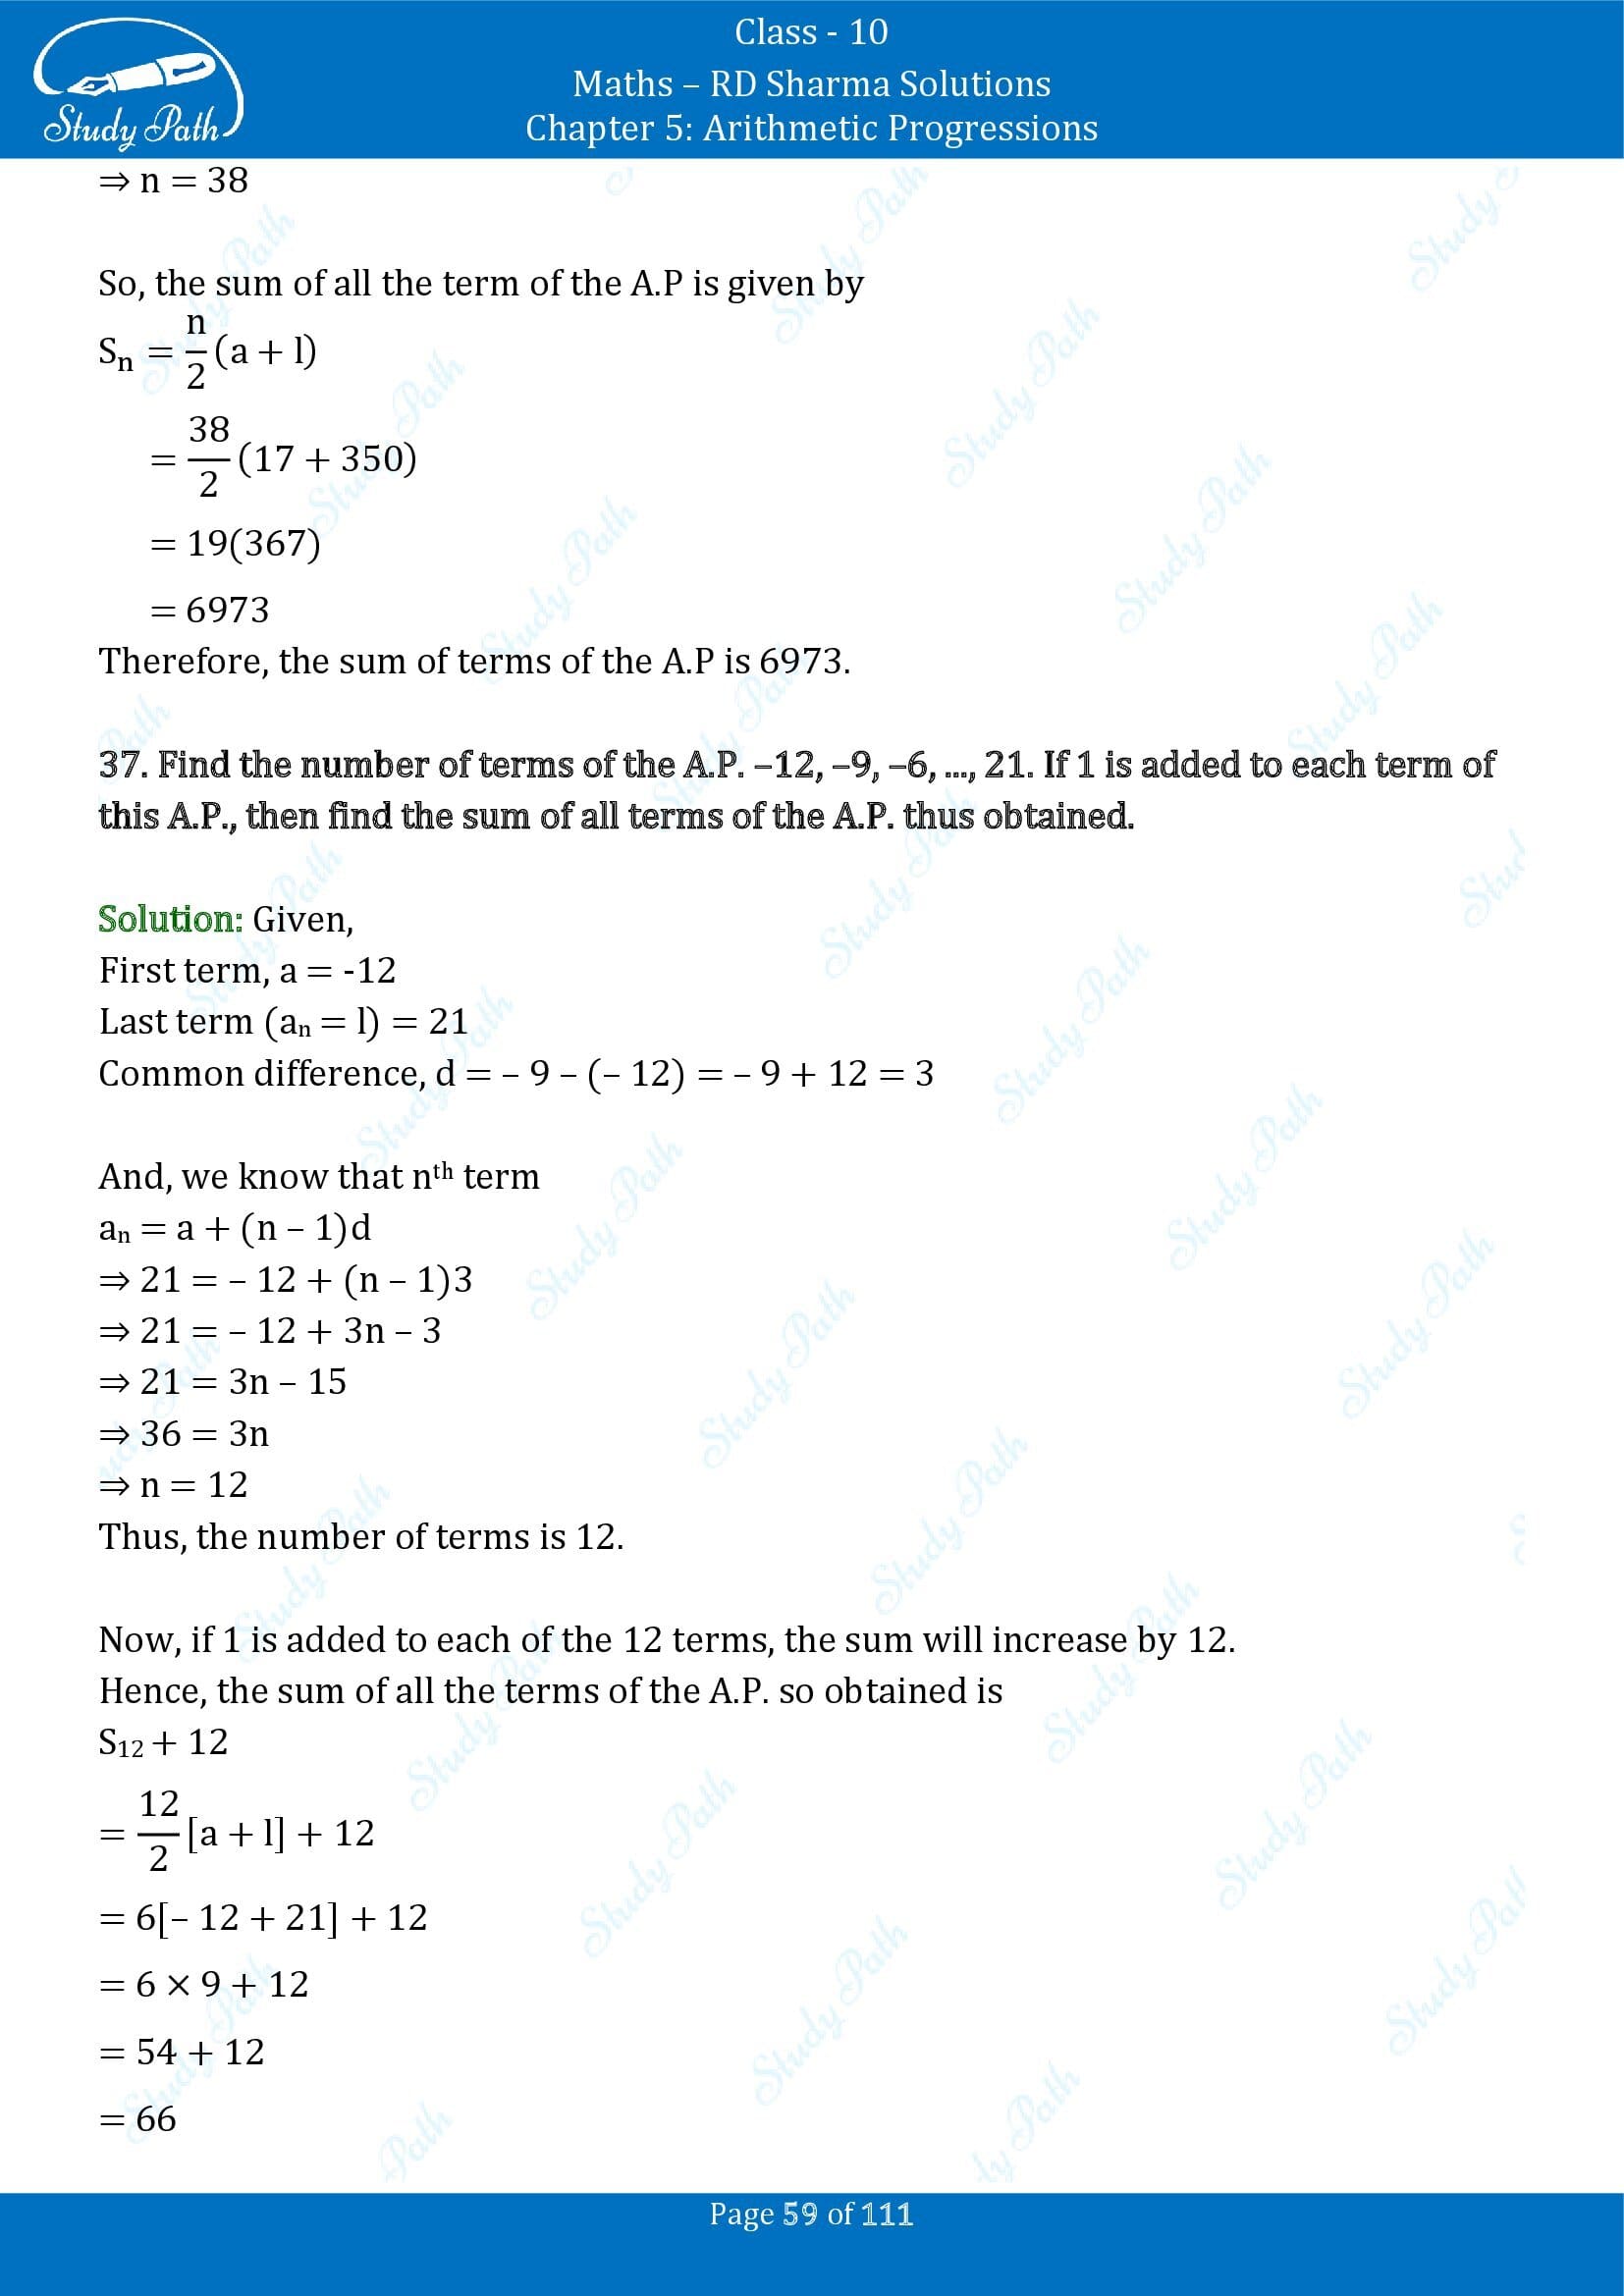 RD Sharma Solutions Class 10 Chapter 5 Arithmetic Progressions Exercise 5.6 00059